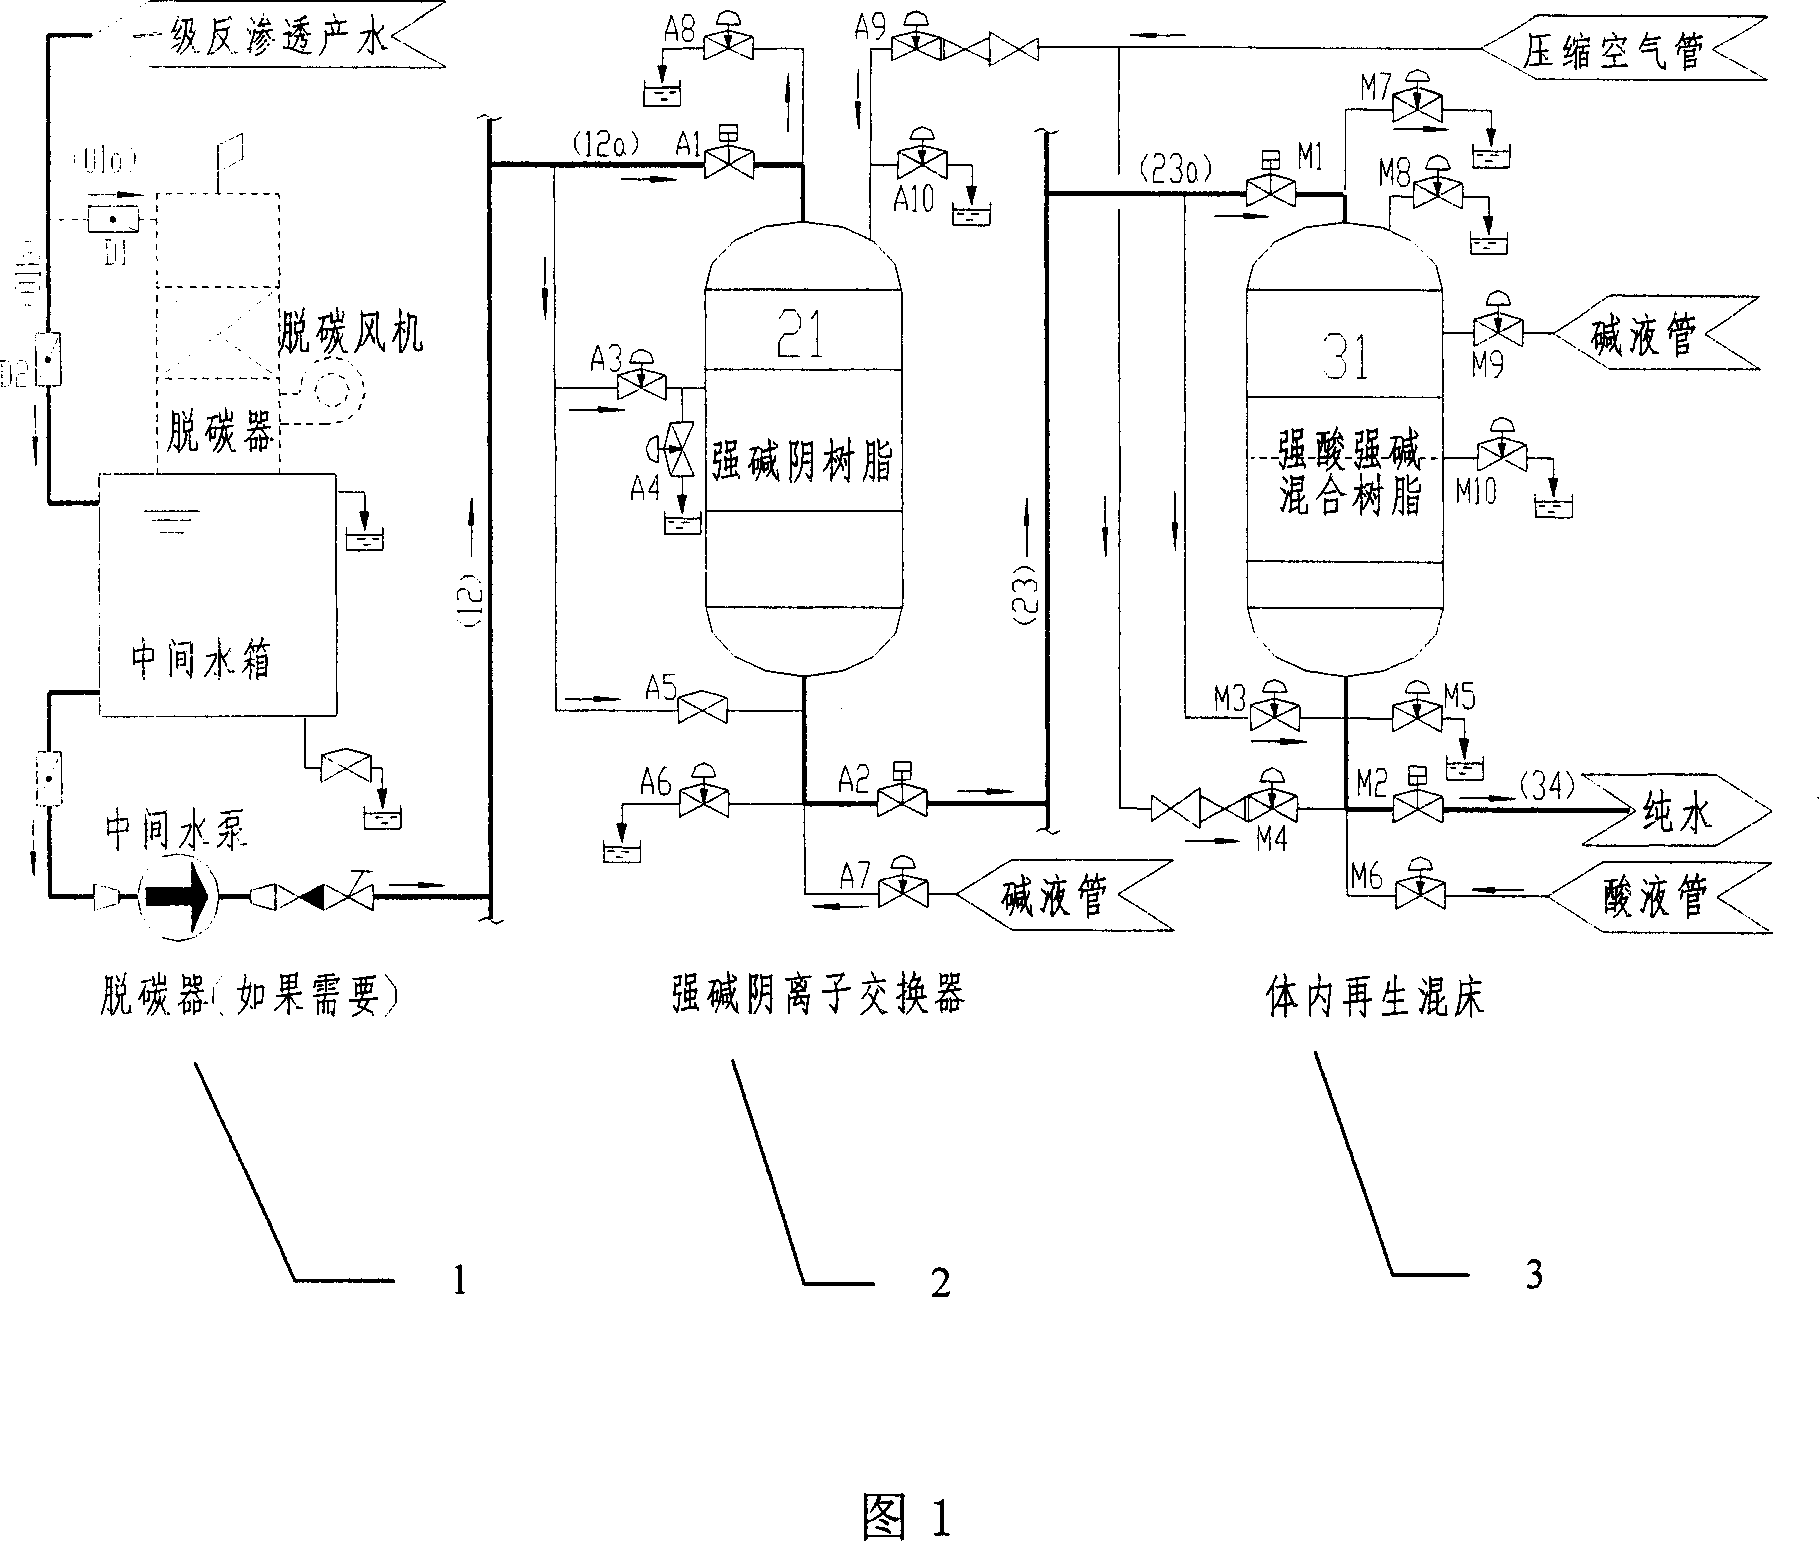 Preparation device and method of first-stage reverse osmosis after chemical desalt optimization pure water